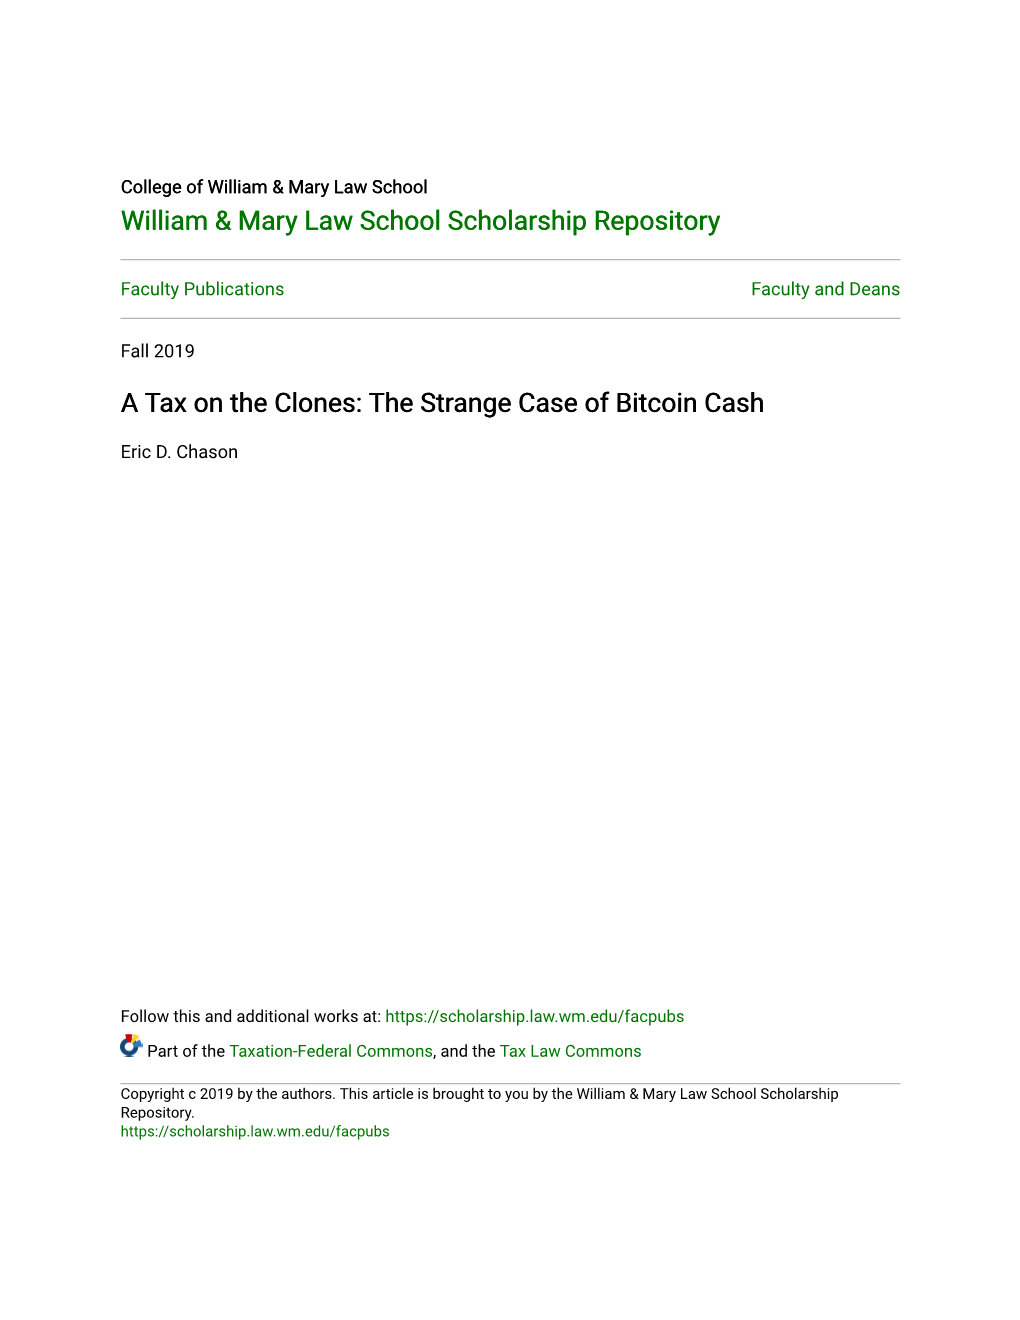 A Tax on the Clones: the Strange Case of Bitcoin Cash